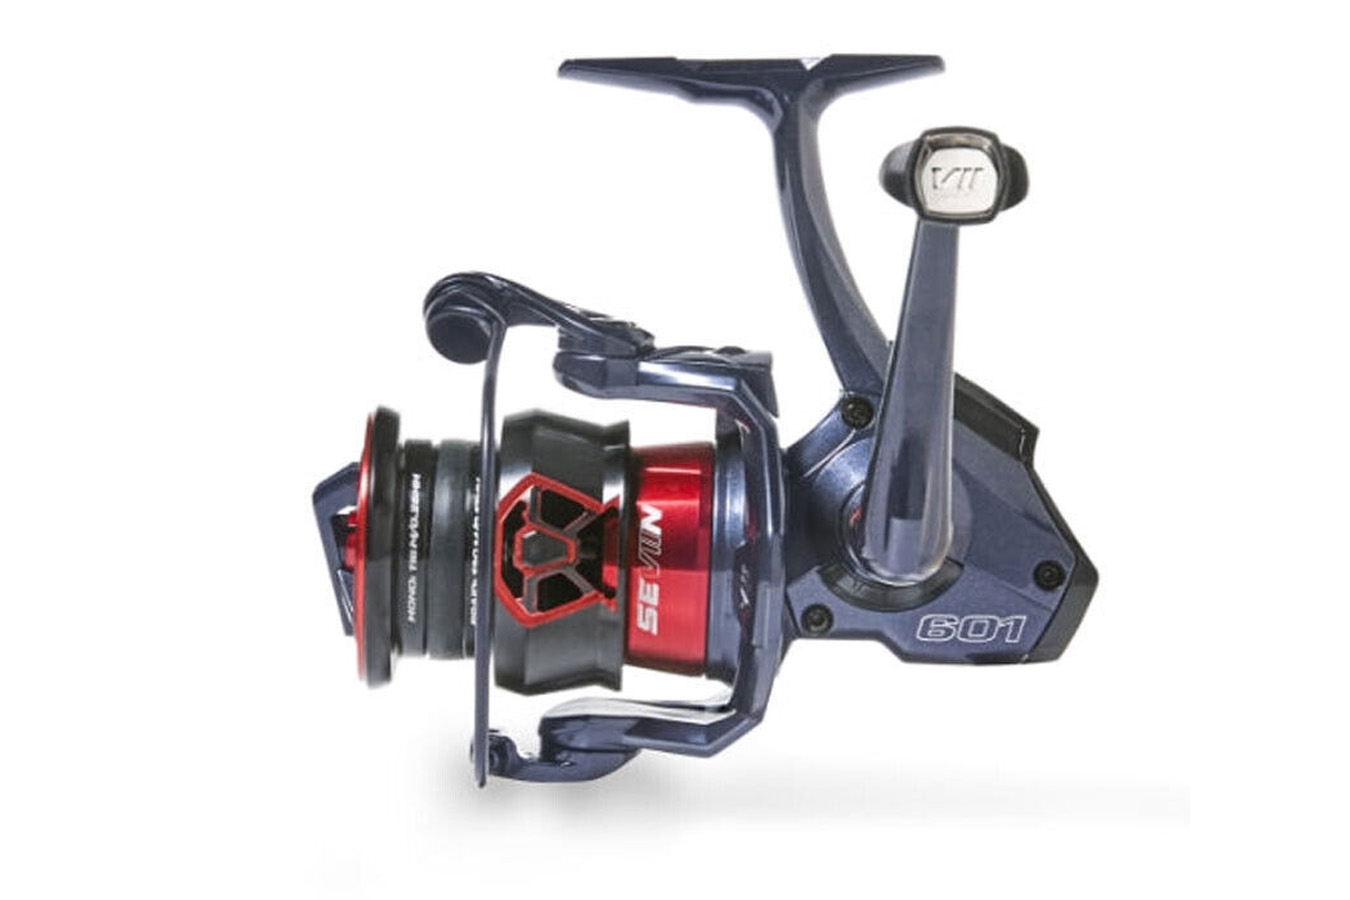 Discount St Croix Seviin 2500 GS Series 6.0:1 Spinning Reel for Sale, Online Fishing Store